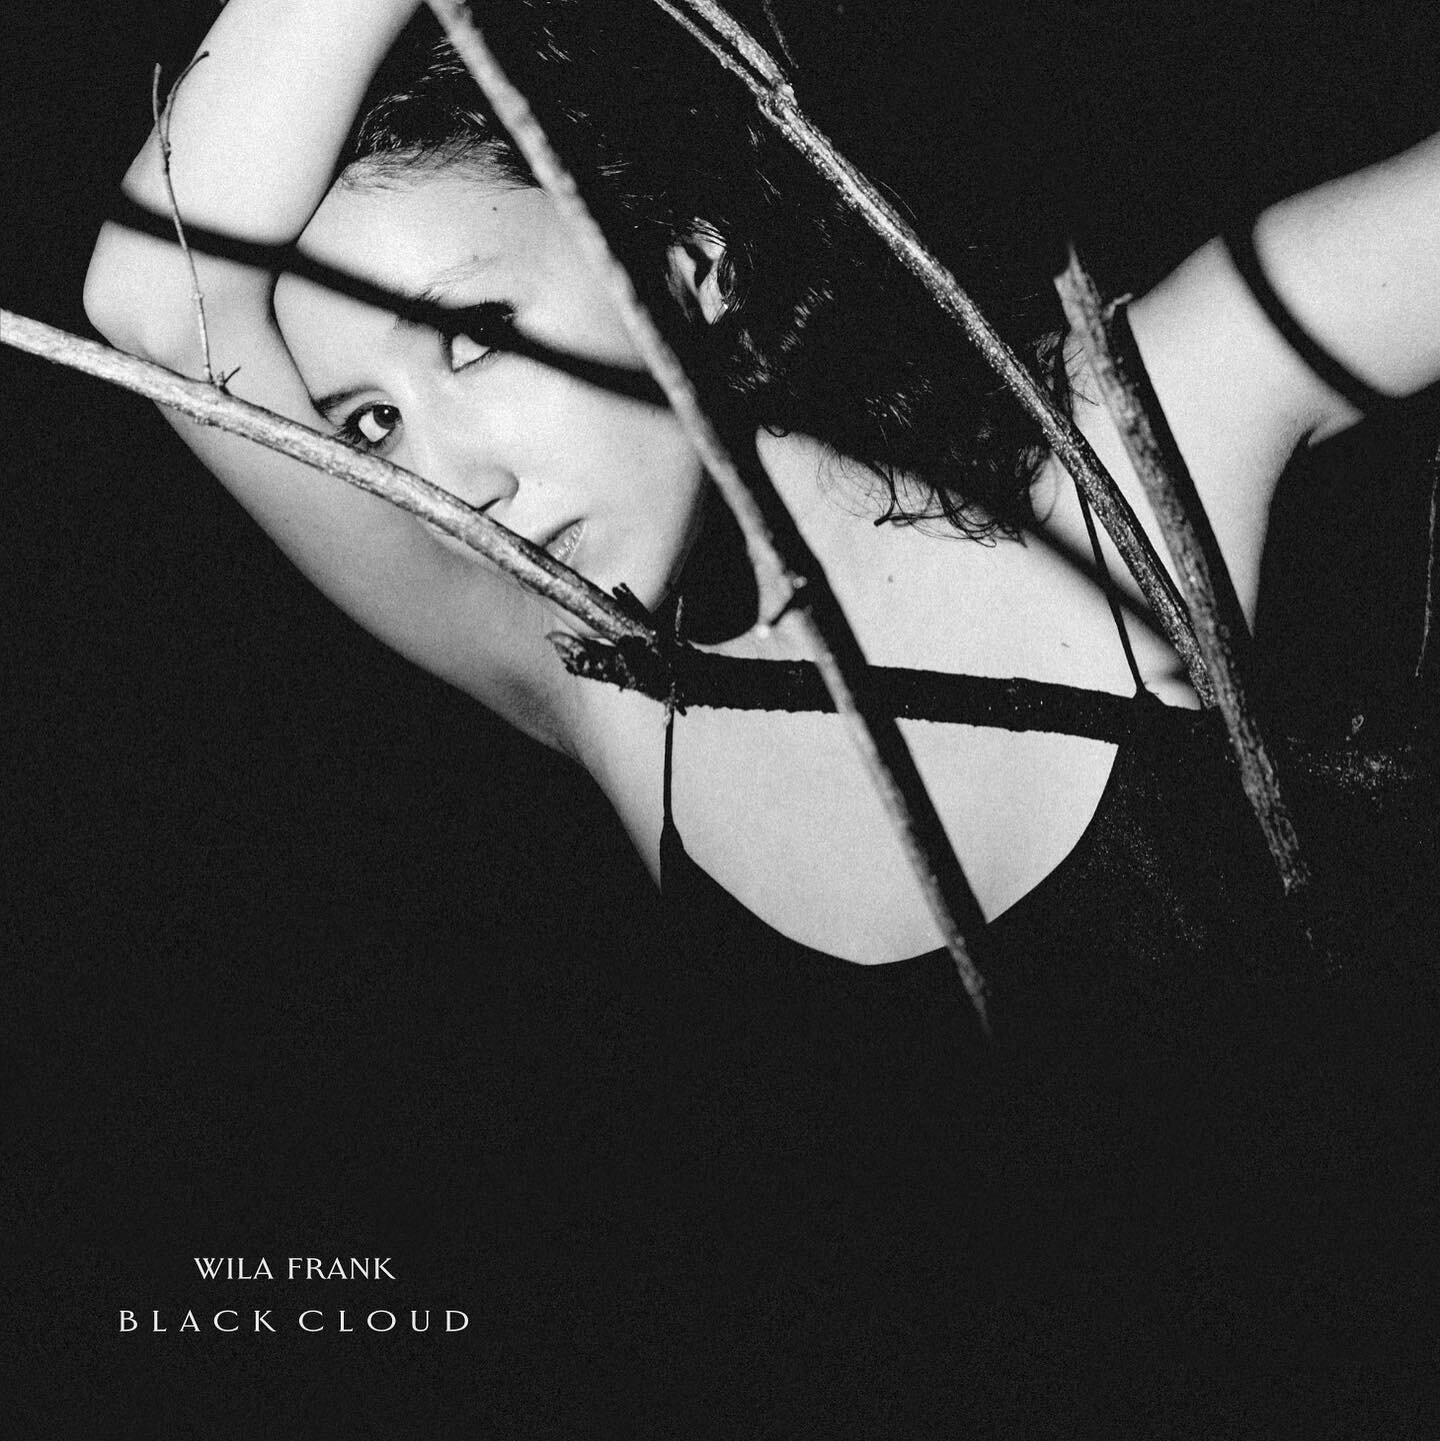 BLACK CLOUD IS OUT TODAY!!! 🖤 I put so much of myself into this album- the light and the dark. As @mitchmosk said in the @atwoodmagazine premiere, it is both a whisper AND a shout. It is a reflection of years of emotions I kept inside and I feel so 